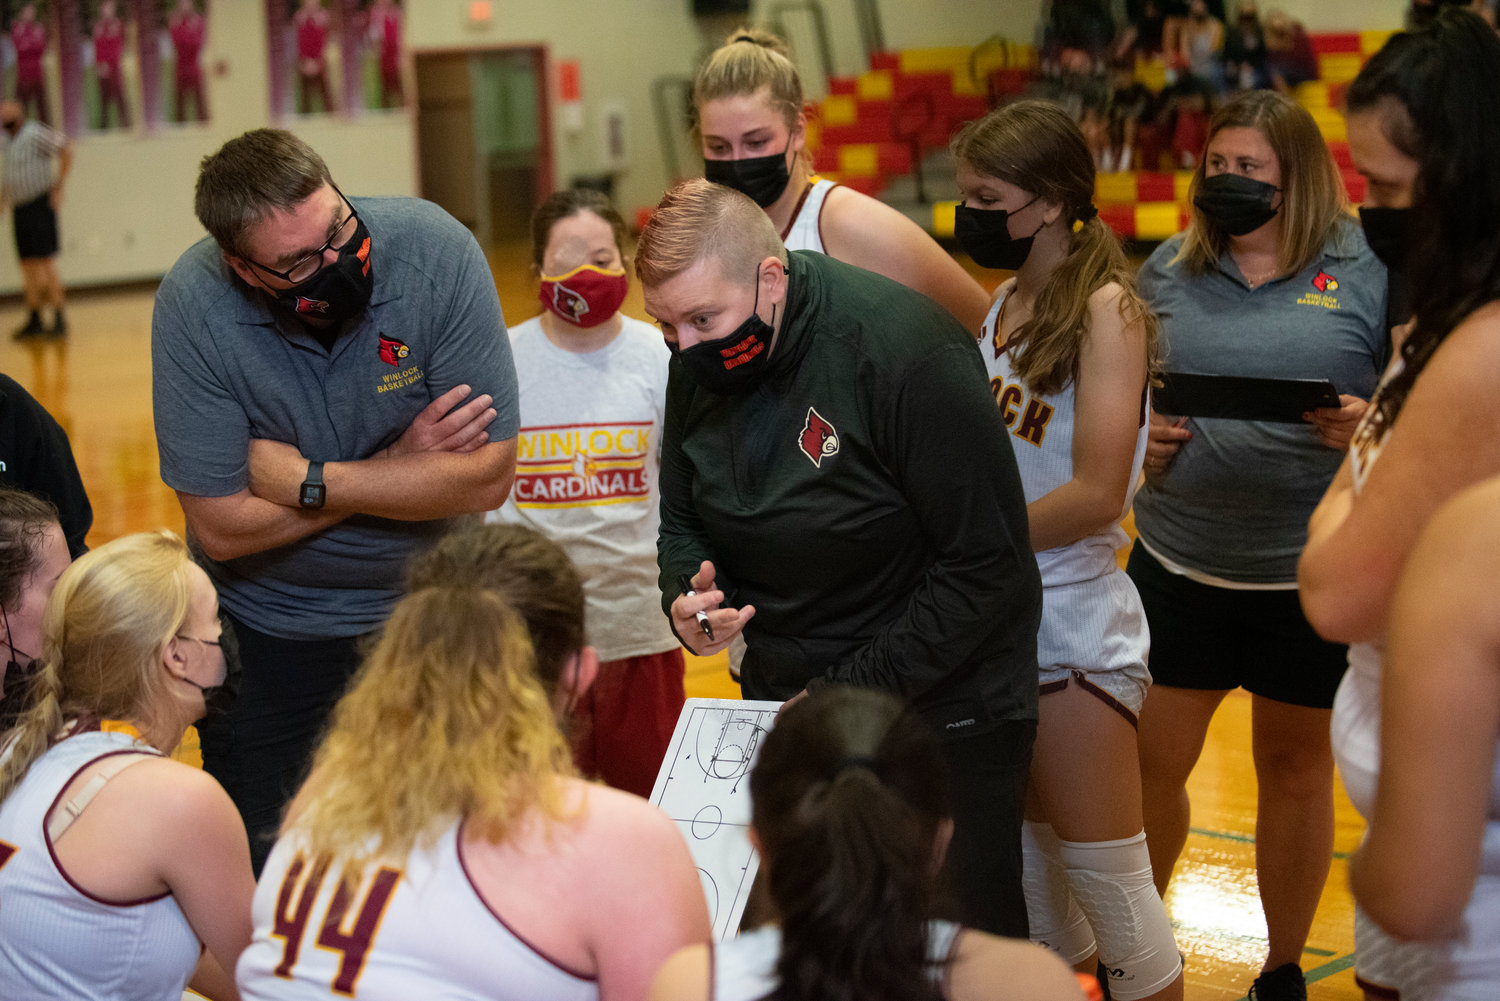 Winlock coach Tori Nelson goes over a fourth-quarter game plan with her team during a timeout.